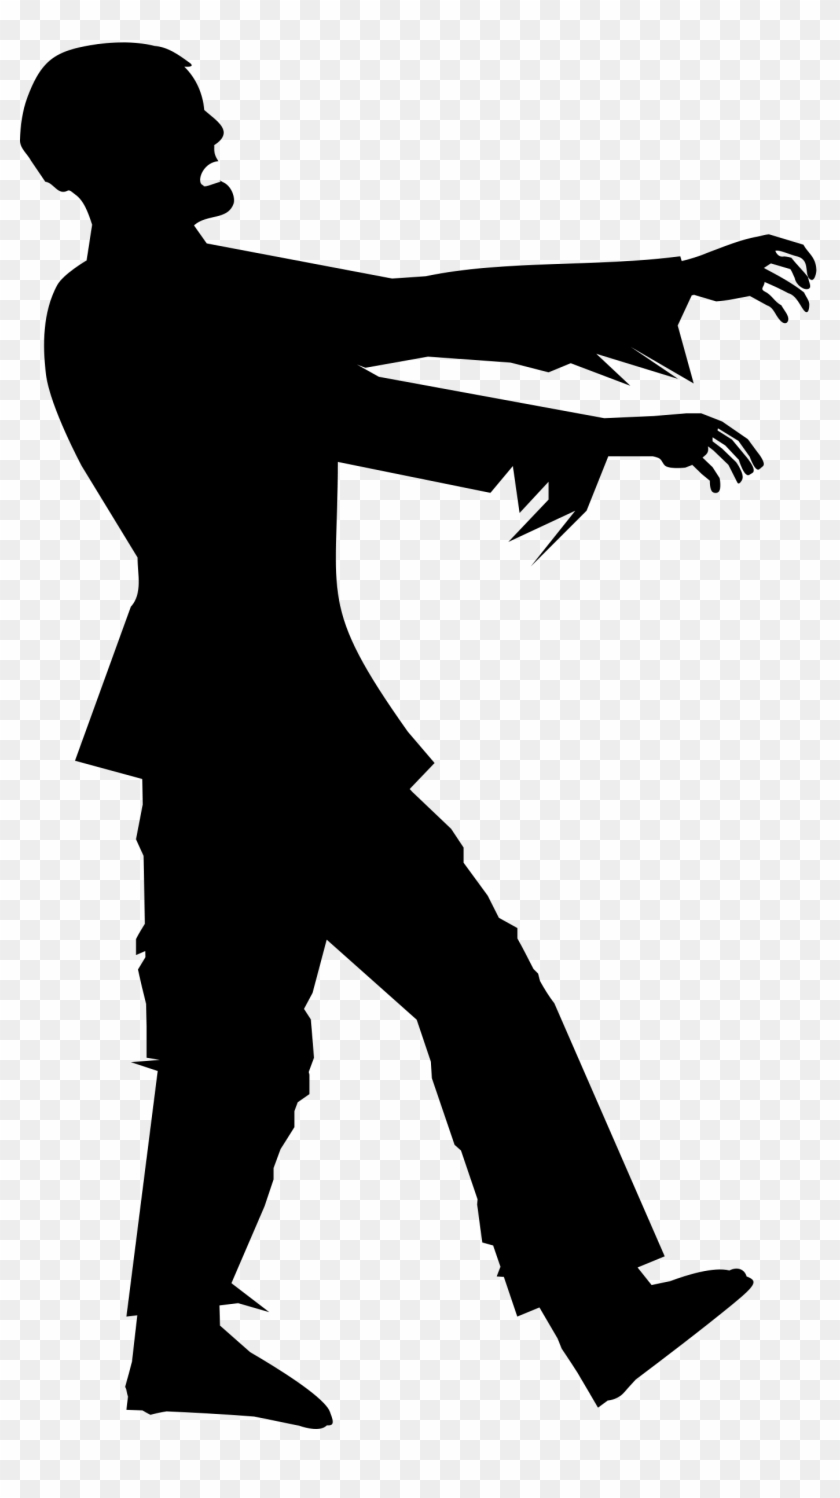 Zombie Clipart Free - Zombie Silhouette #1274970